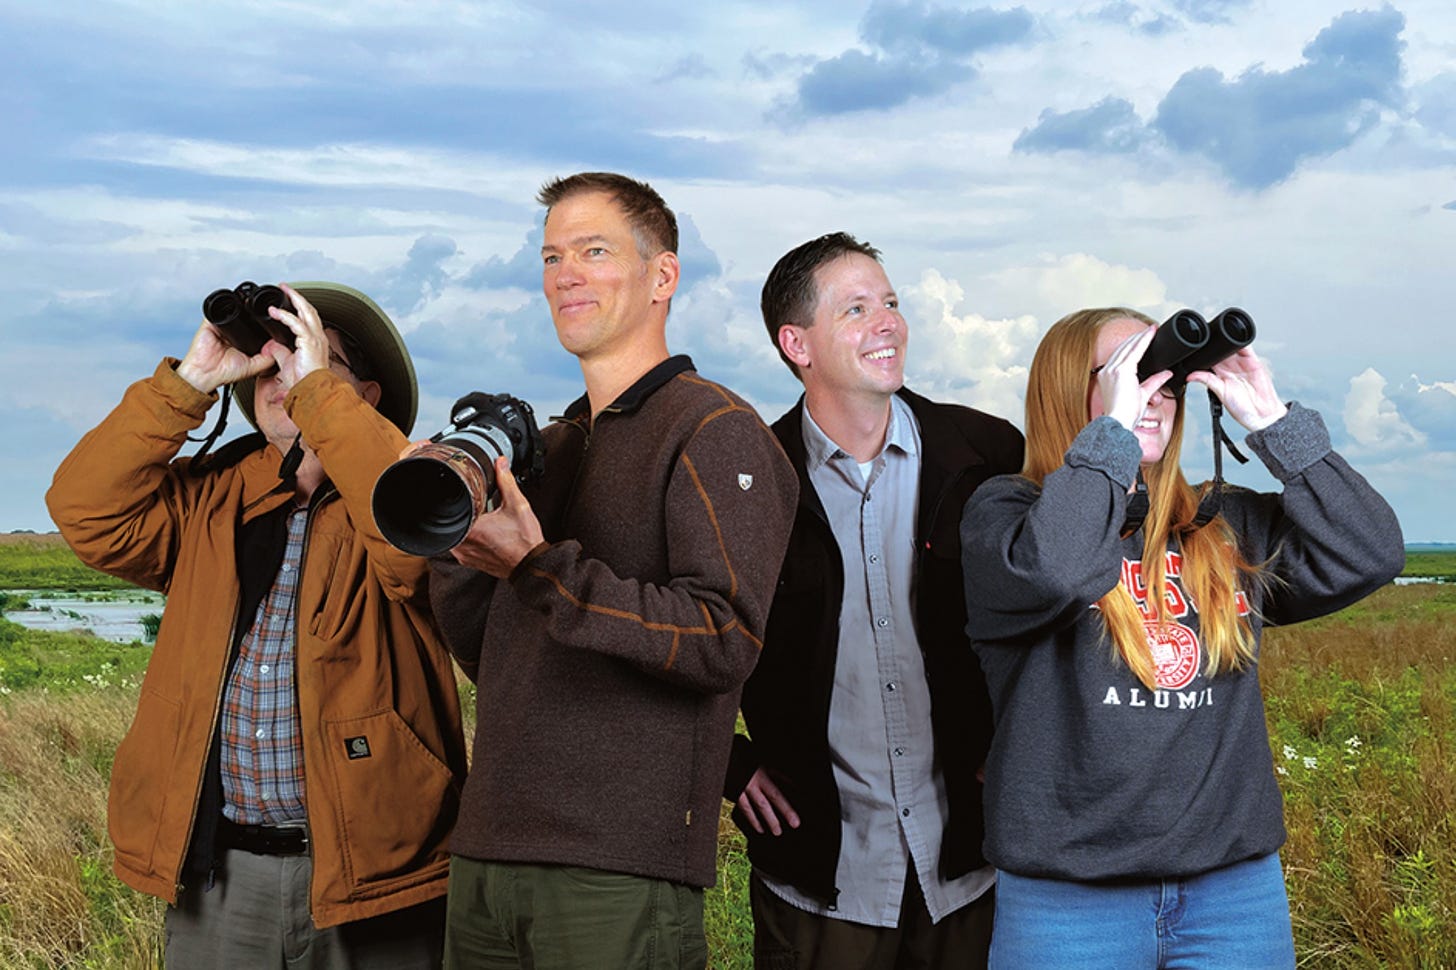 This photo is from an article in the Redbird Impact magazine about the Fluddles initiative. In the photo are biologist Angelo Capparella looking through binoculars, author Bill Davison with a camera, ISU Professor R.J. Rowley looking off into the distance, and ISU student Brittany Menzel looking through binoculars. The background is a wetland on a sunny day.